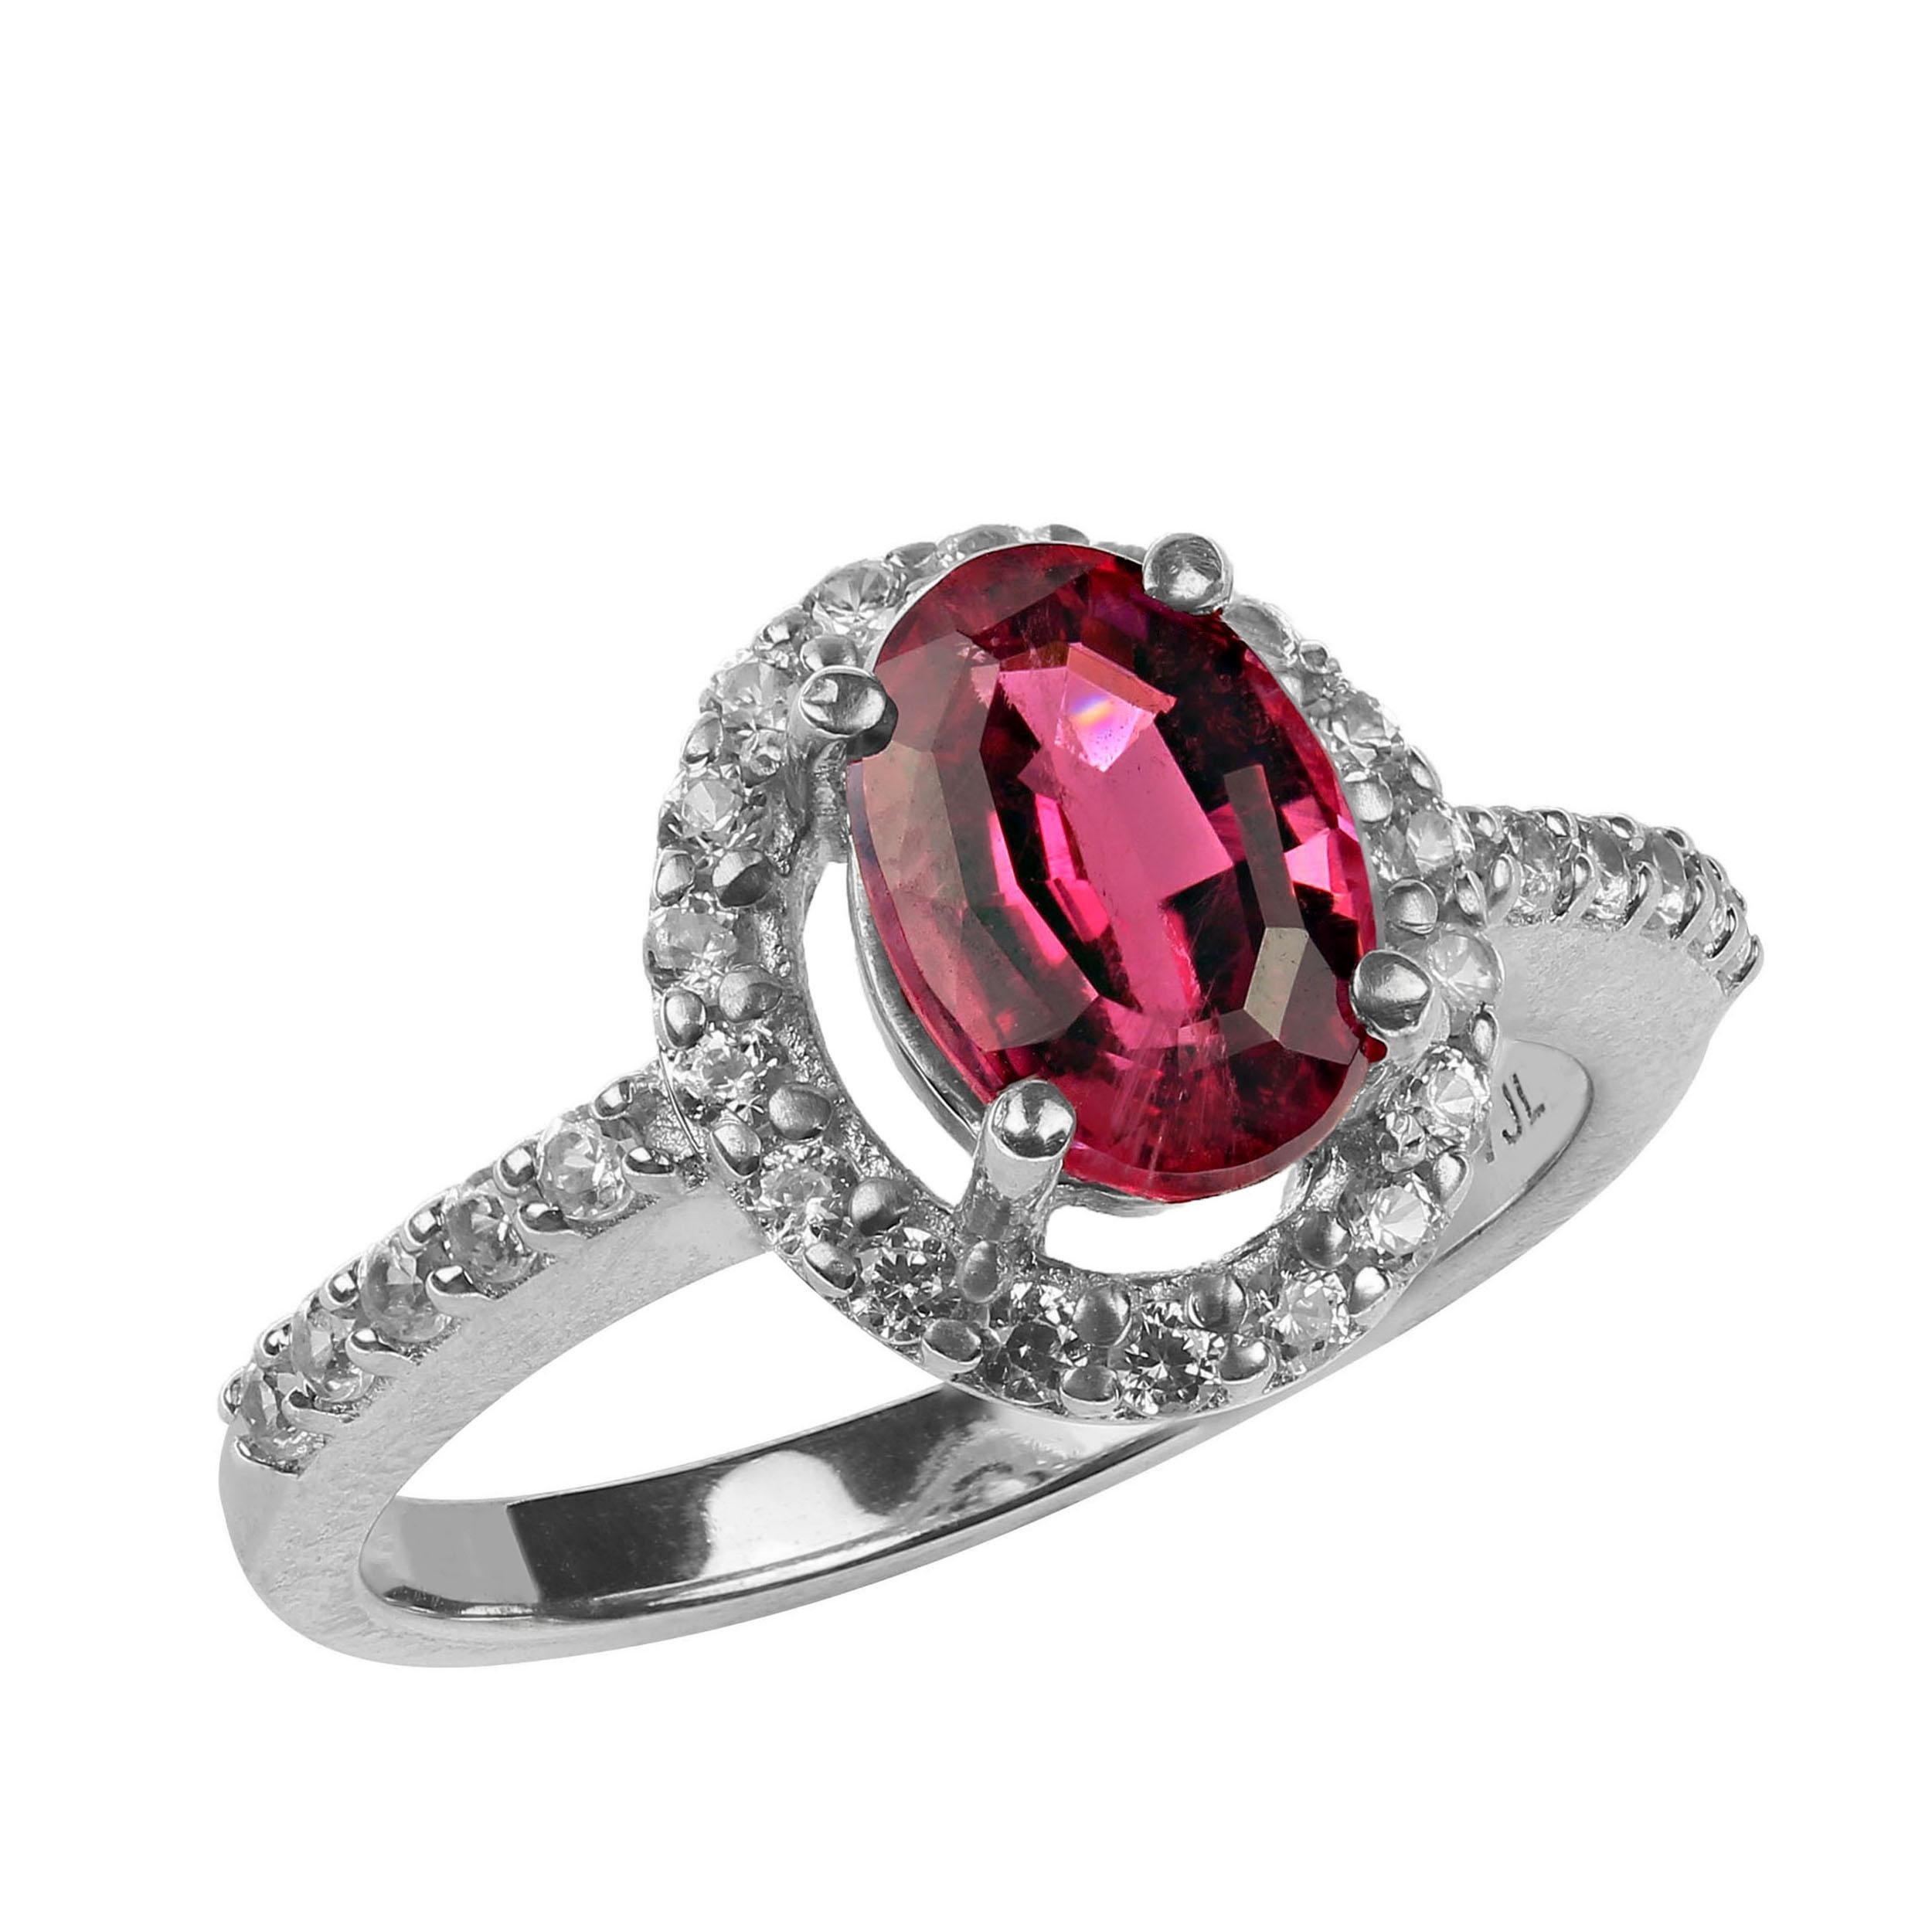 Oval Cut AJD 1.6Ct Oval Rubelite in Halo in Sterling Silver Perfect Valentine's Day Gift! For Sale